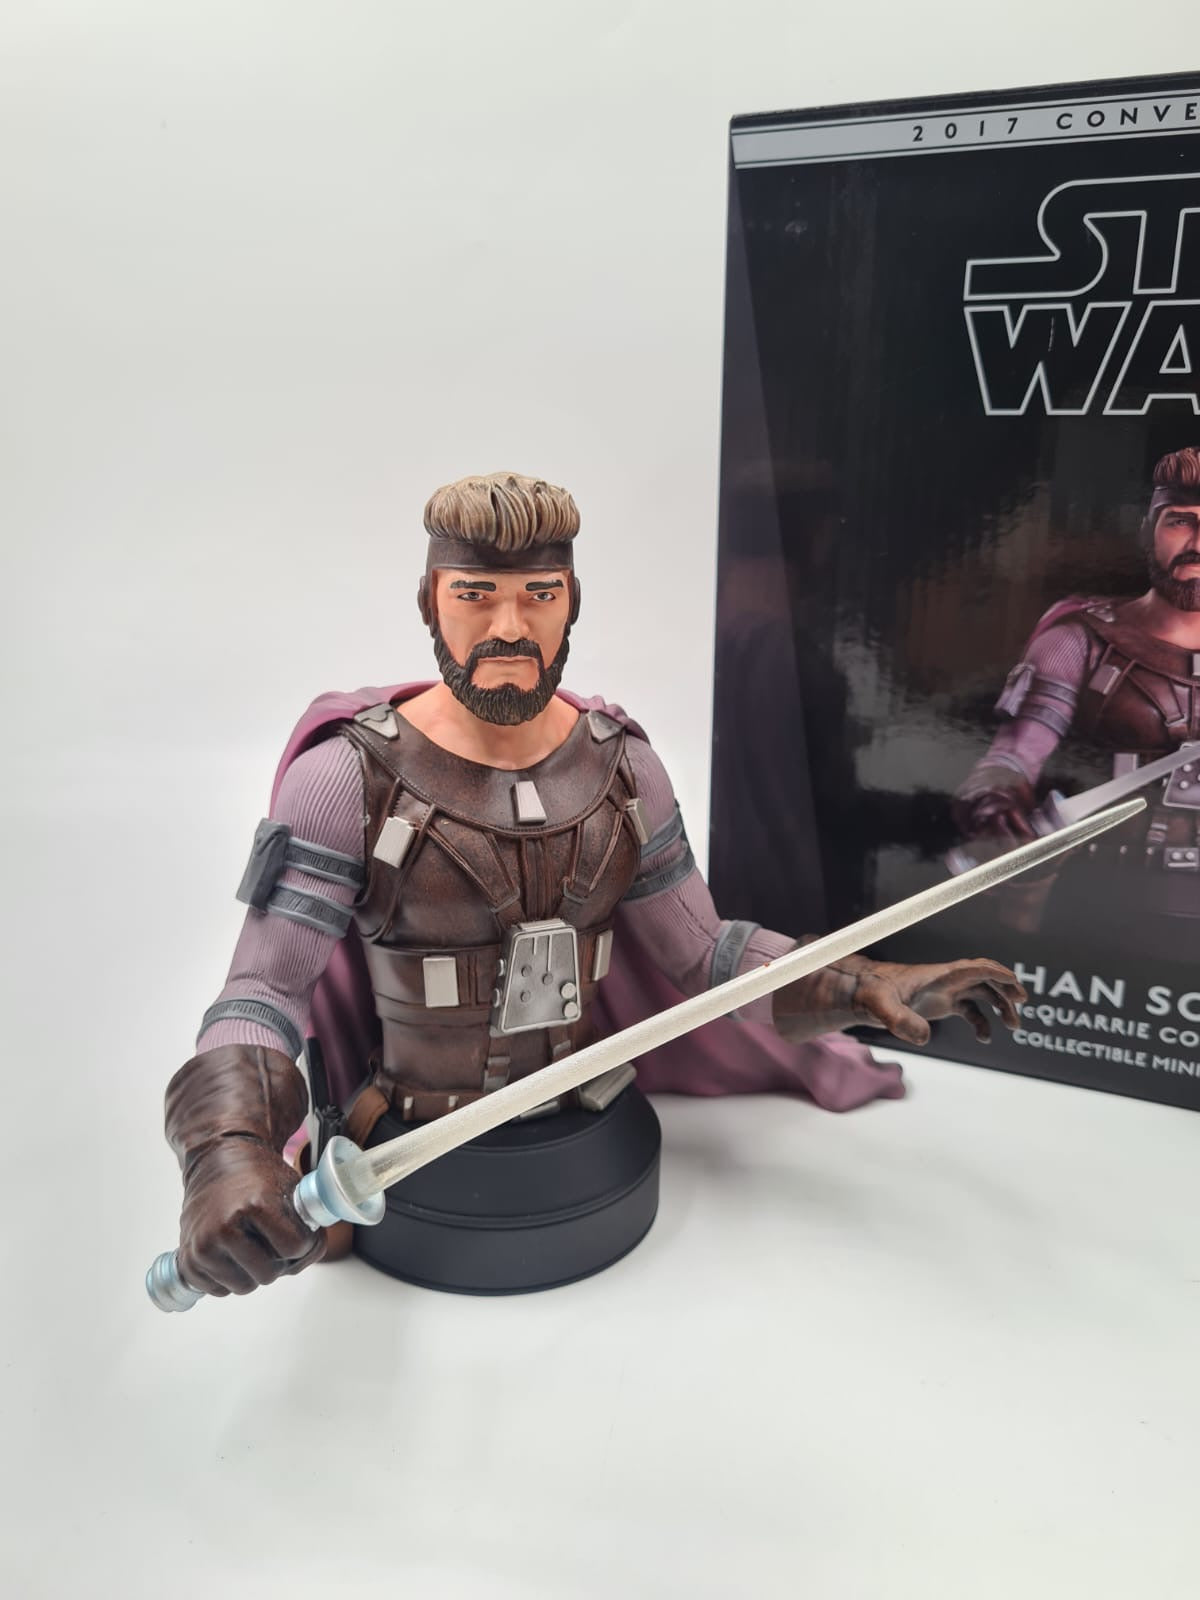 HAN SOLO (MCQUARRIE CONCEPT) COLLECTIBLE MINI BUST 2017 CONVENTION EXCLUSIVE